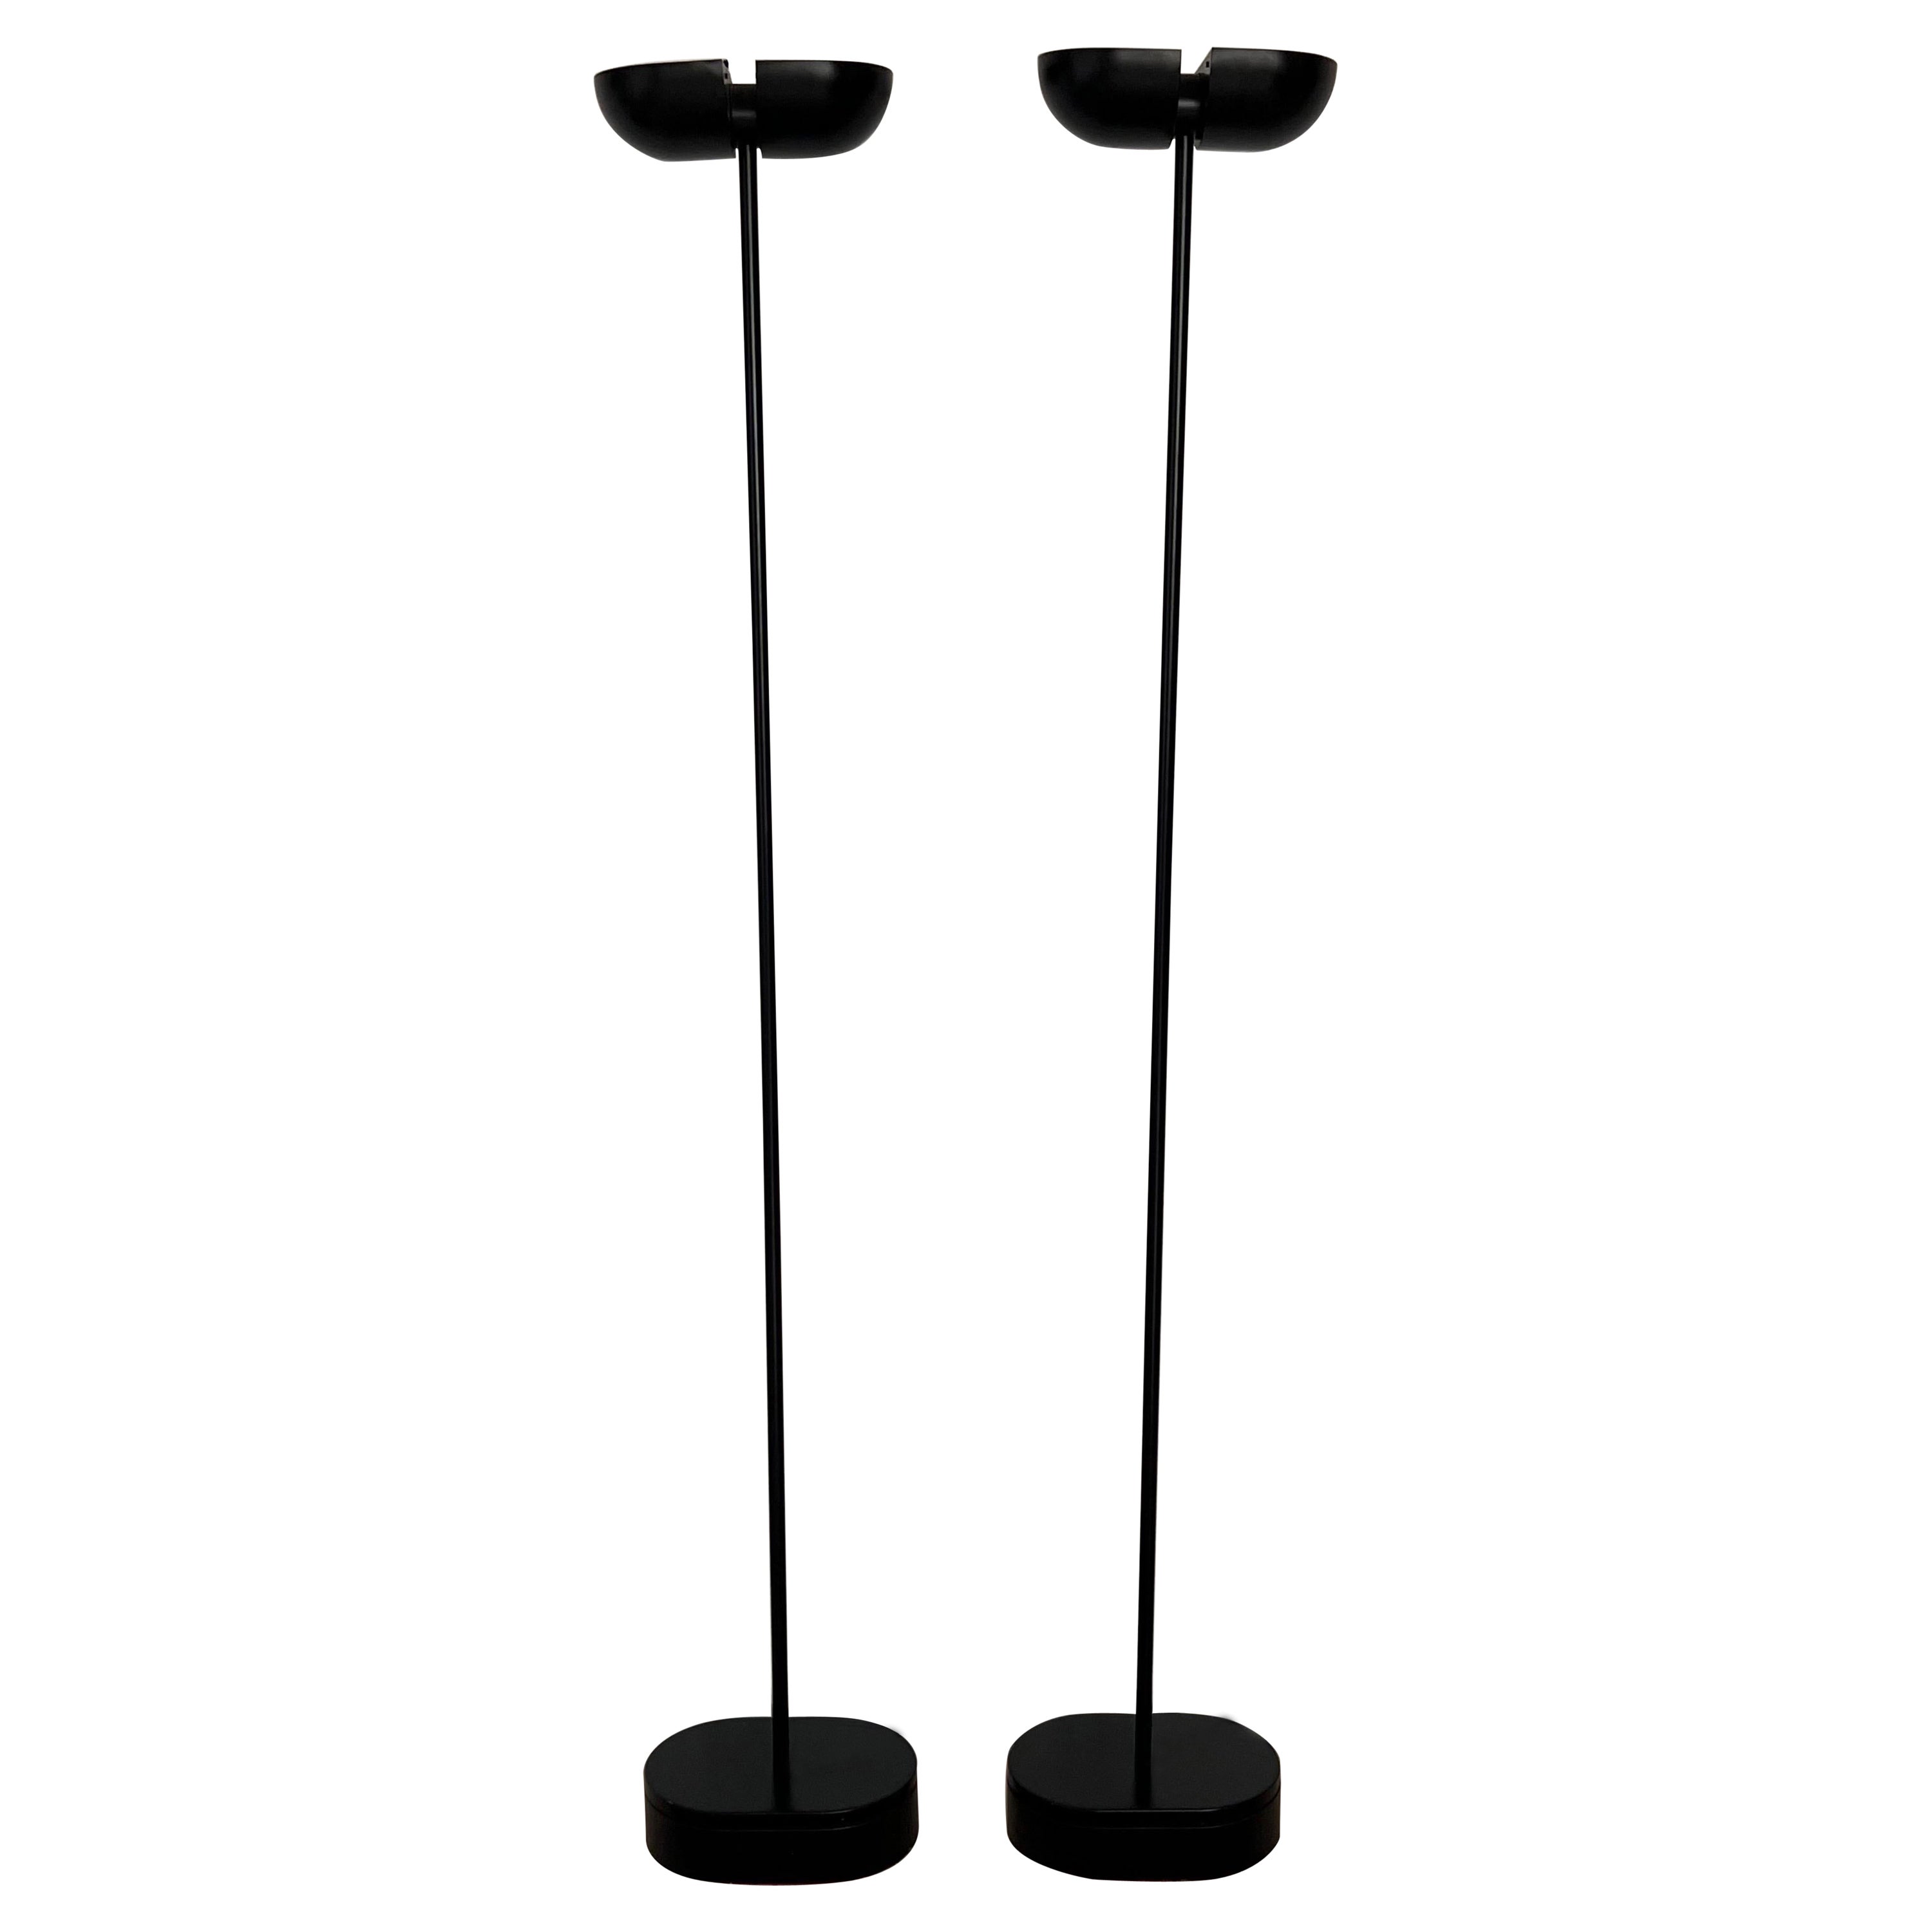 Postmodern Black Torchiere Floor Lamps with Adjustable Heads, 1980s, a Pair